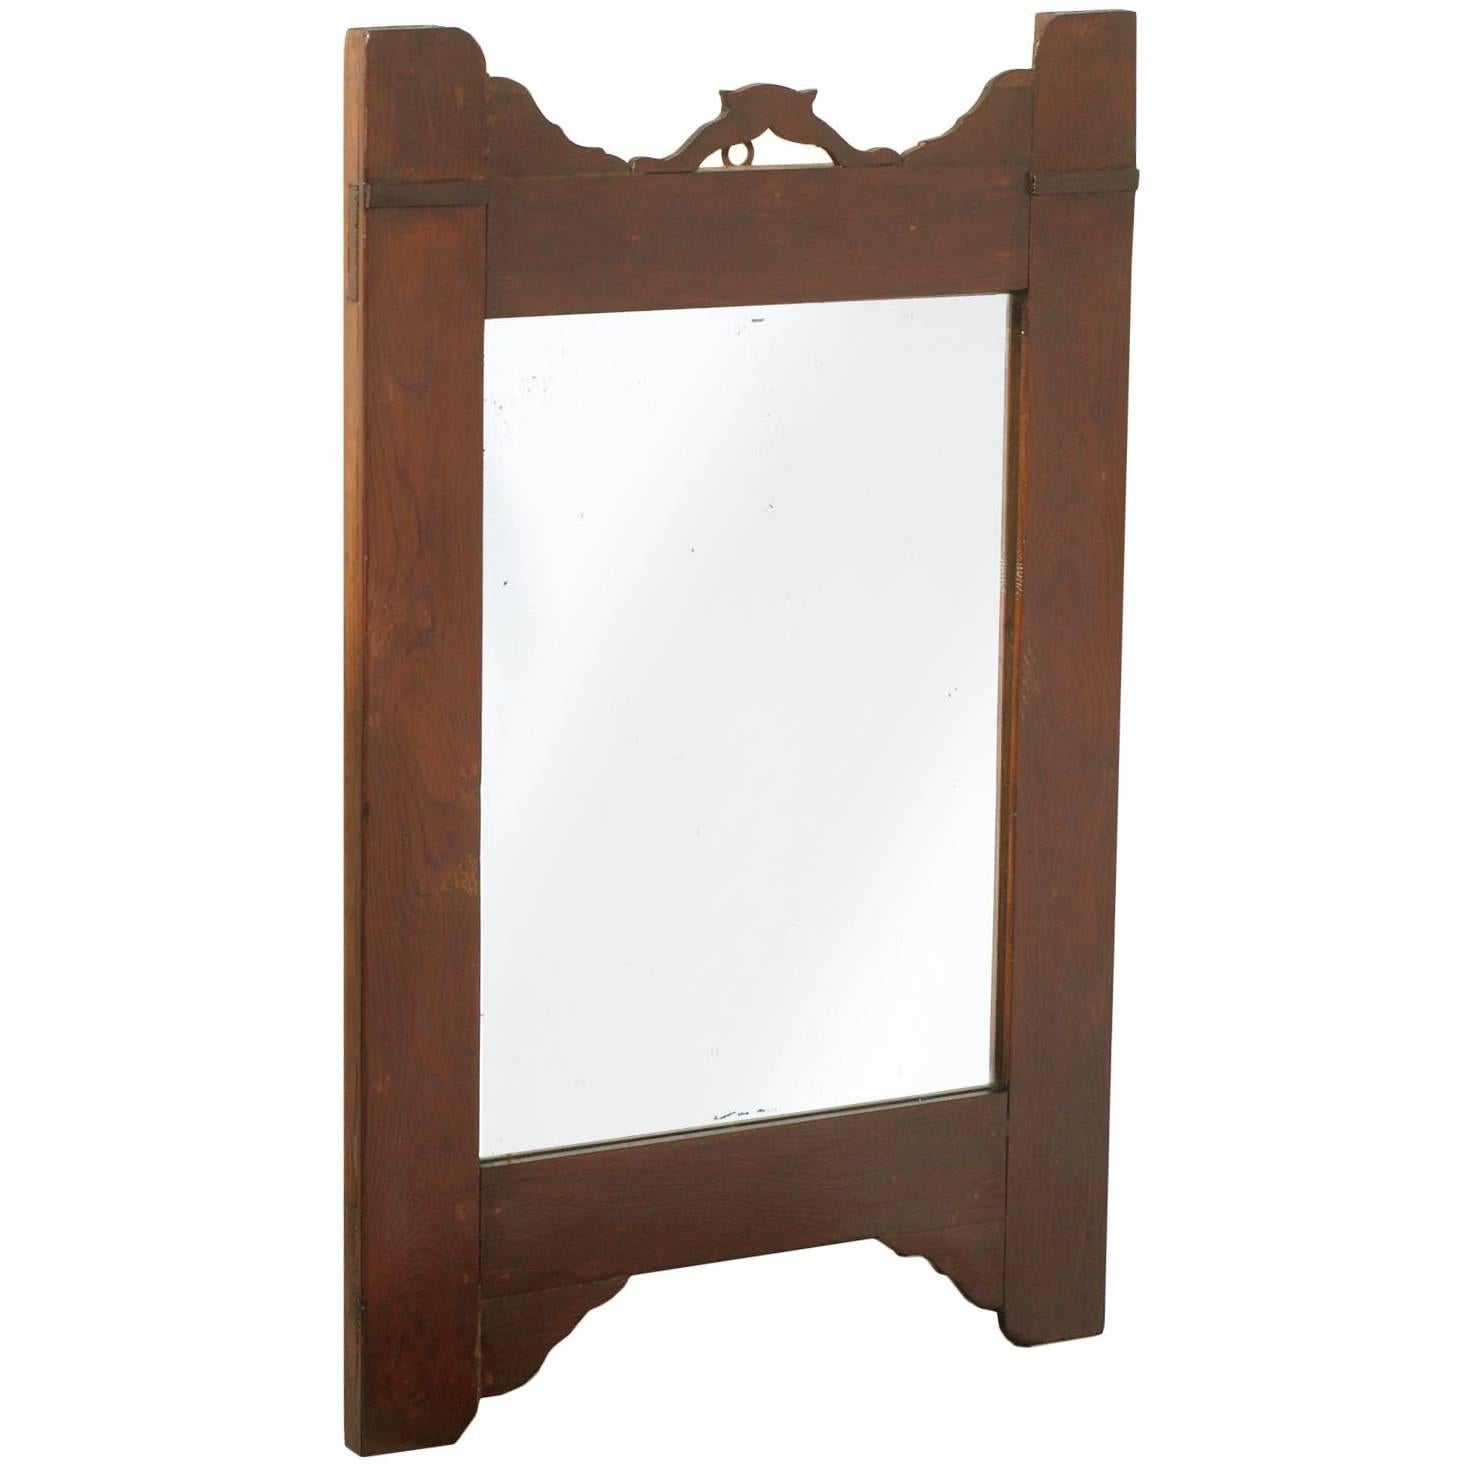 Late 19th Century Country Art Nouveau Mirror, Walnut, Wax polished For Sale